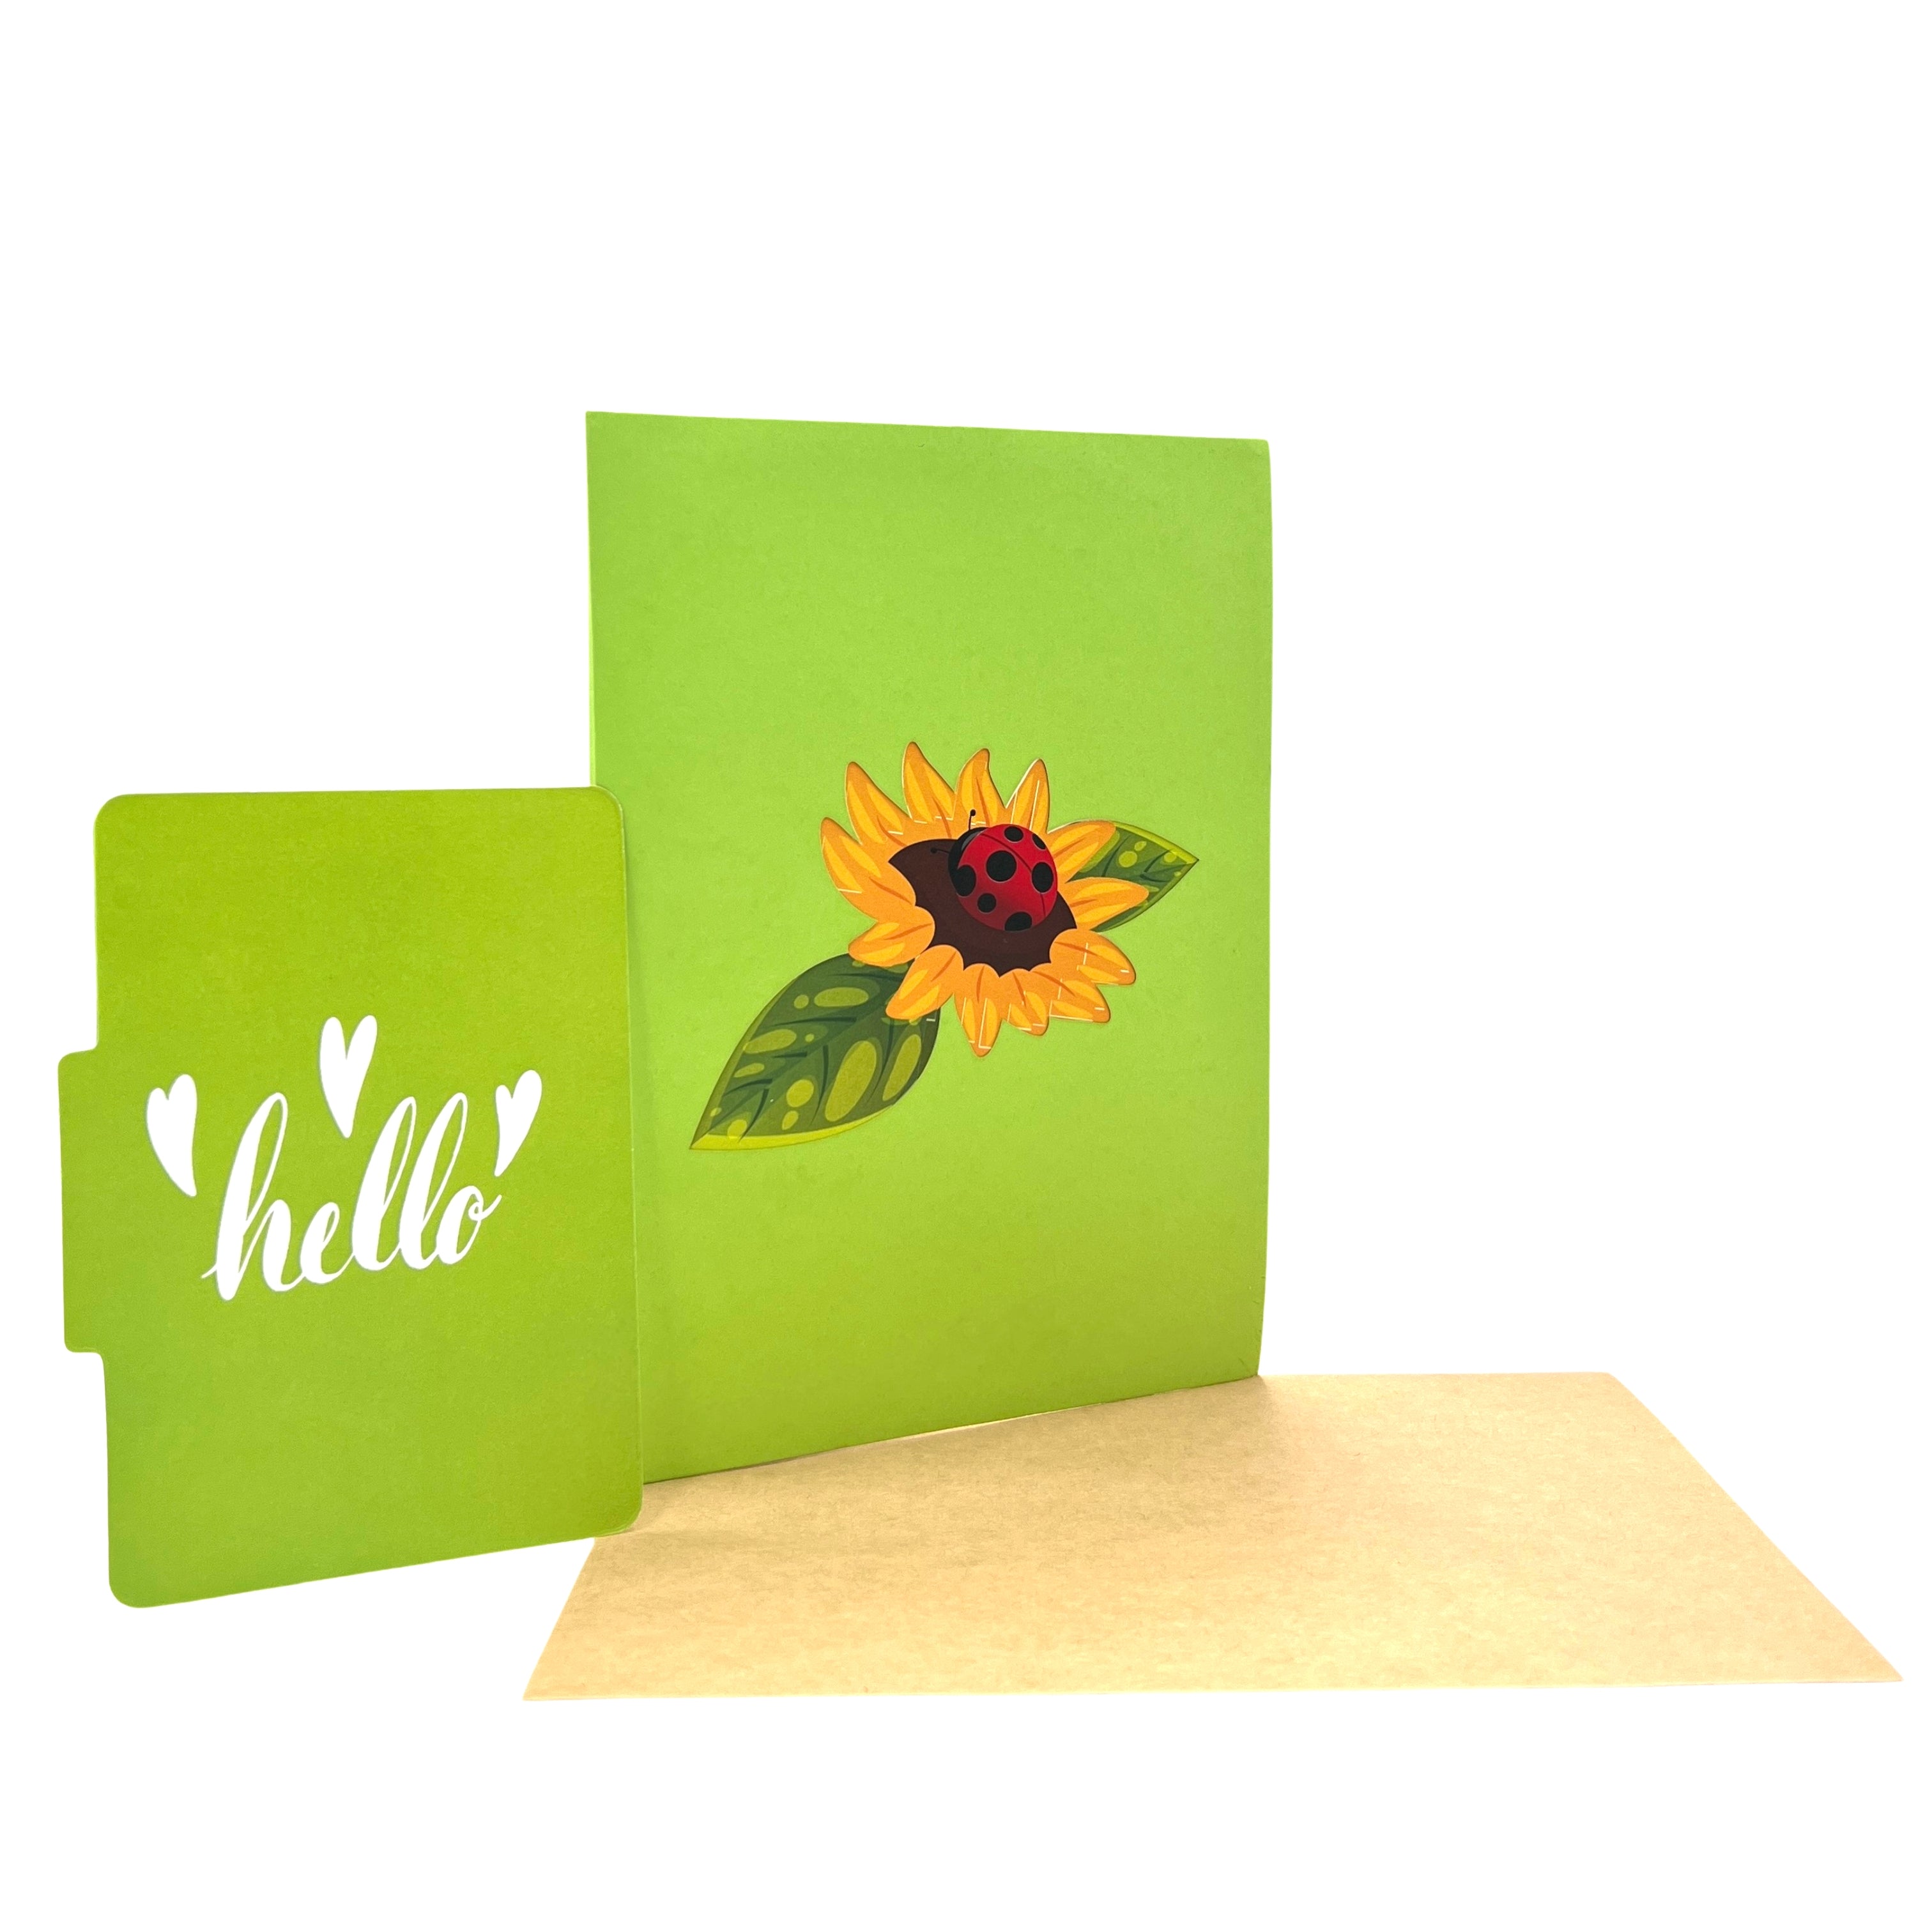 Pop Up Greeting Card a Ladybug on SunFlower Card, Flower Nature Animal Lover Card Thank You Birthday Gift for Kid Mom Dad Family Friend